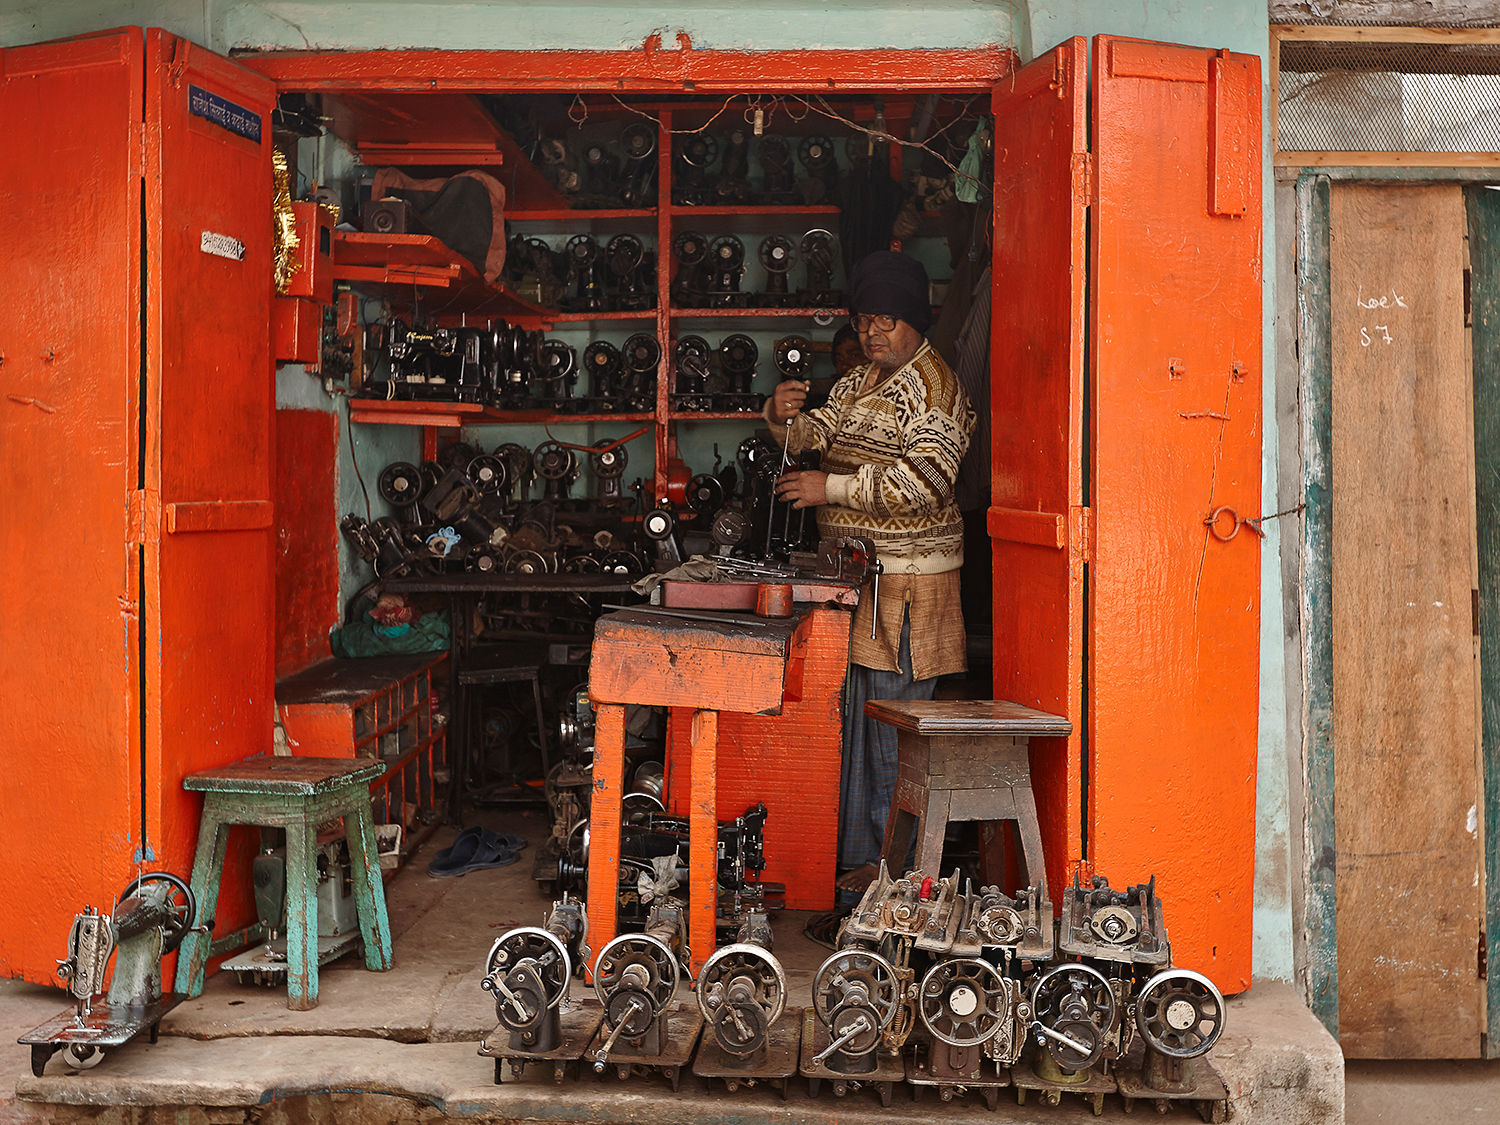 A Sewing-machine mechanic in his workshop